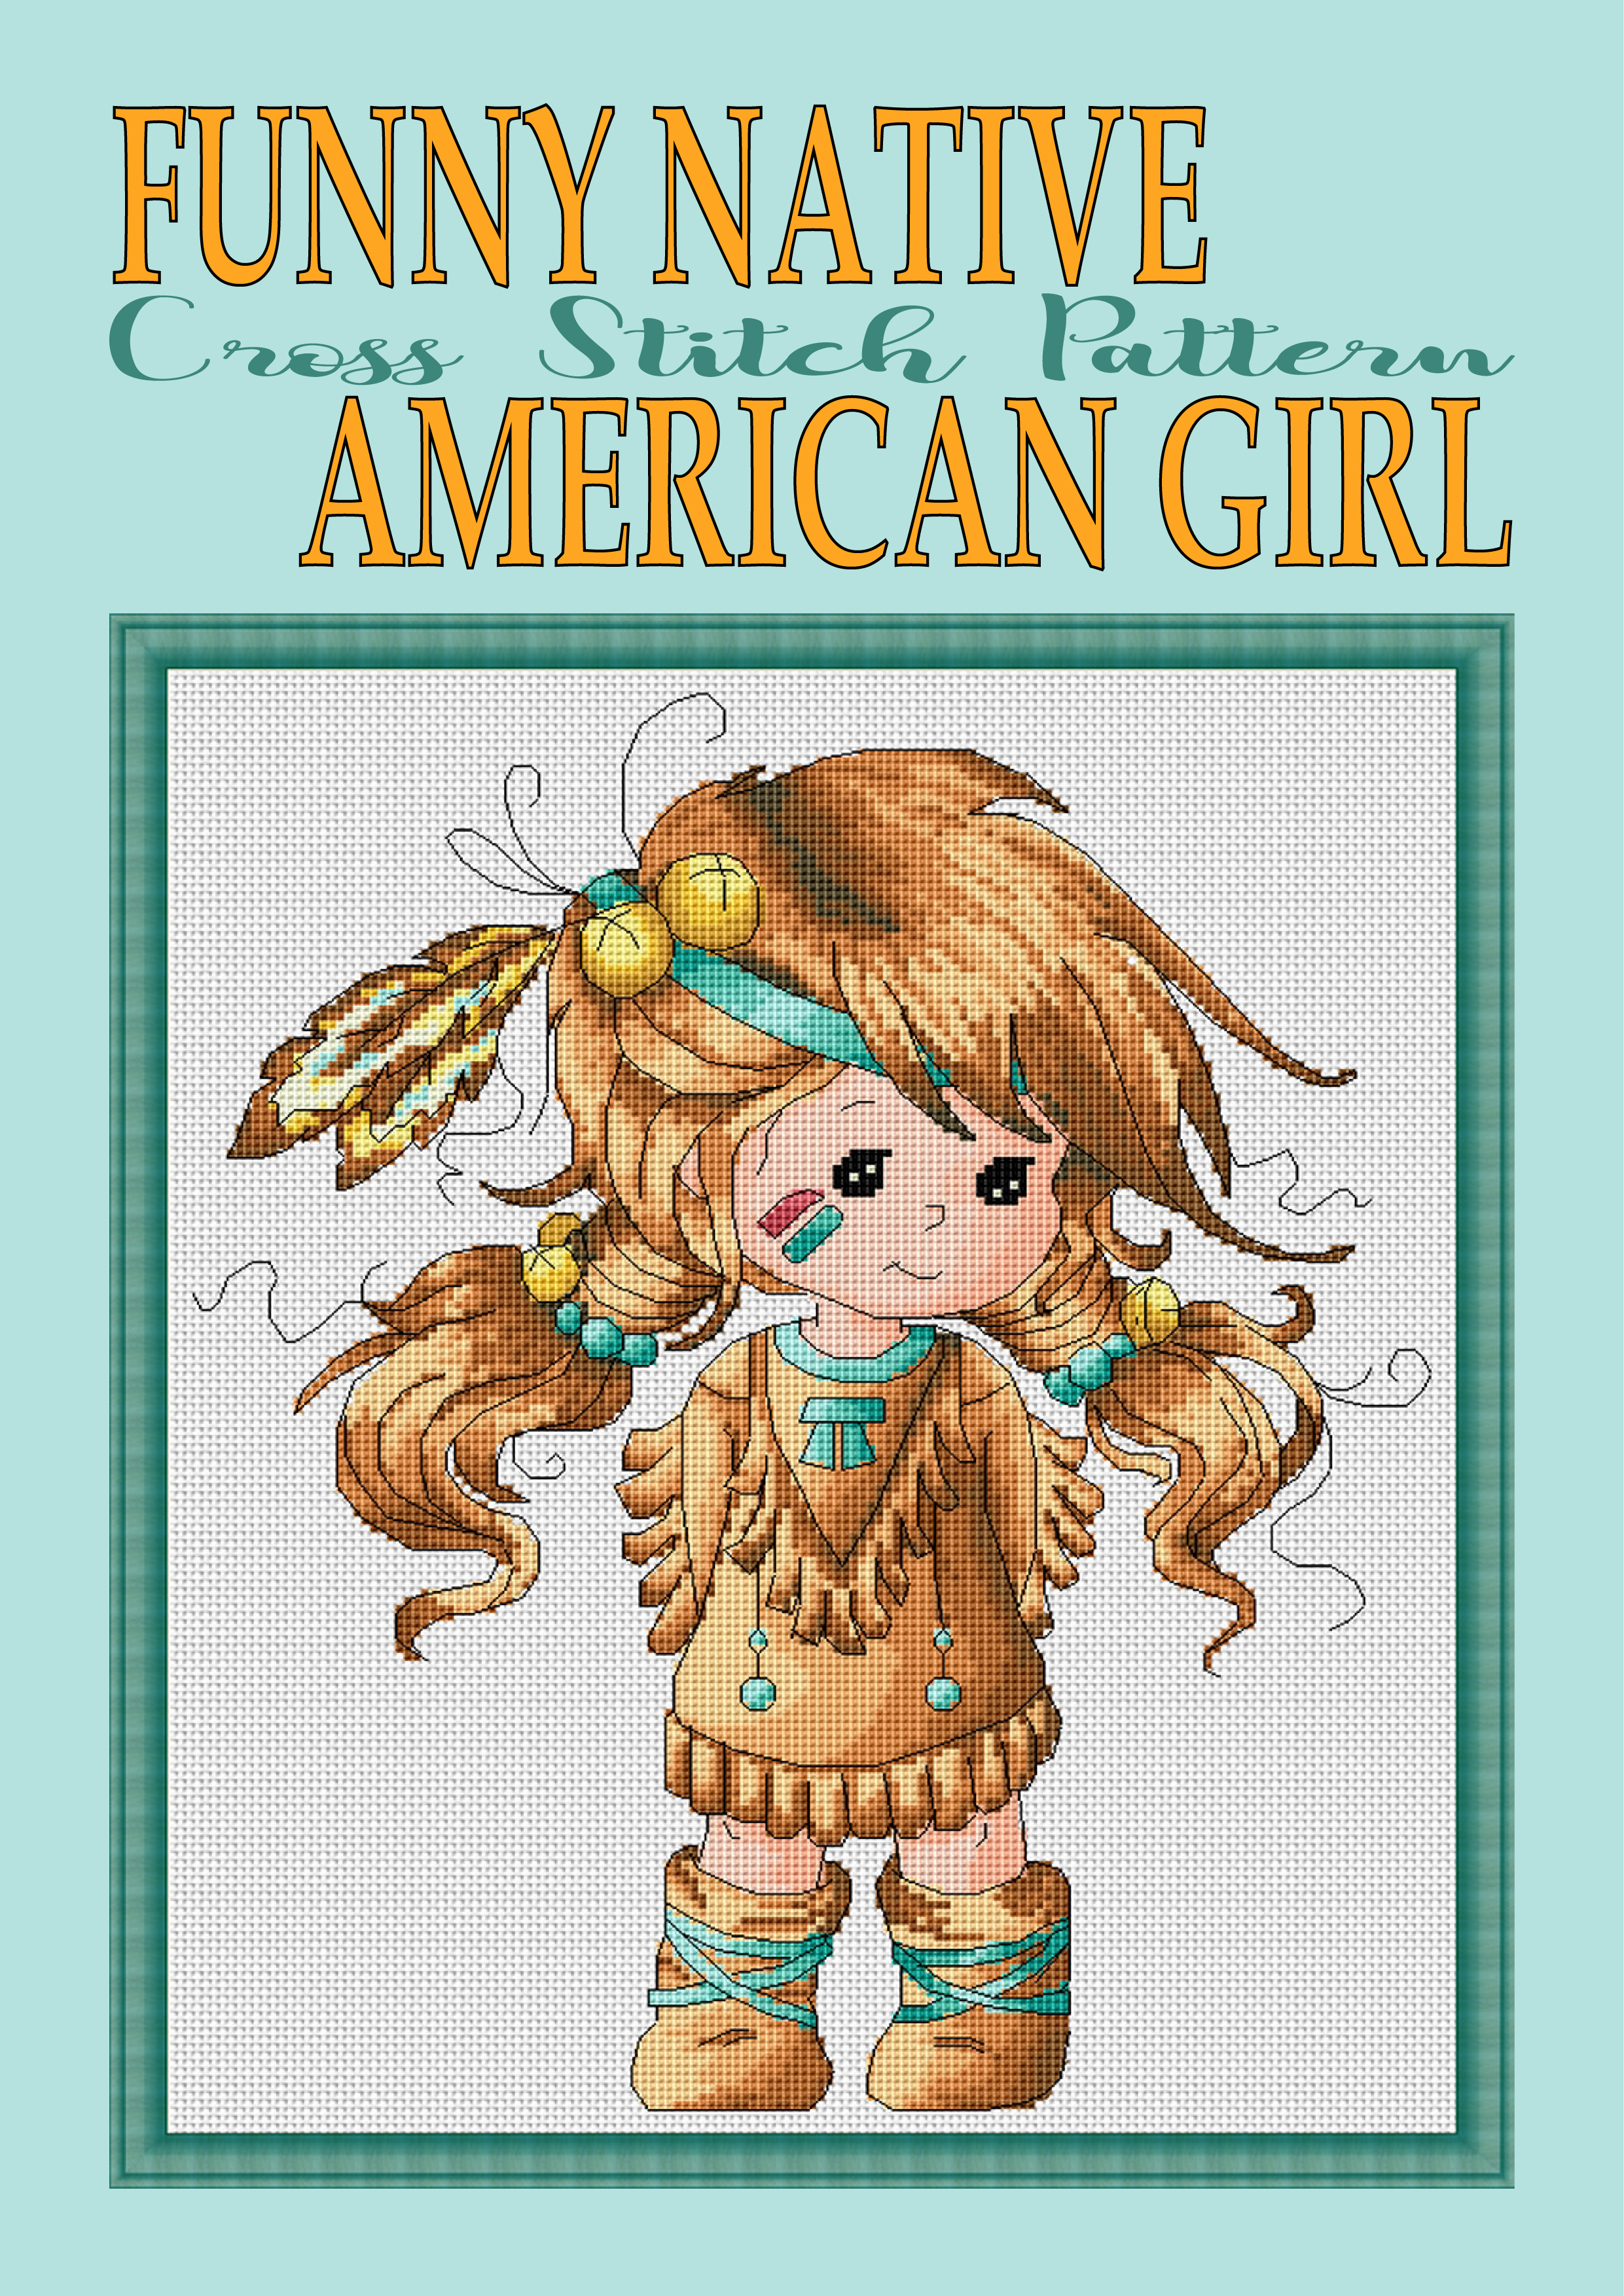 Smashwords – Funny Native American Girl Cross Stitch Pattern Project/ New  Unique Needlework Design – a book by Inna Zimovec